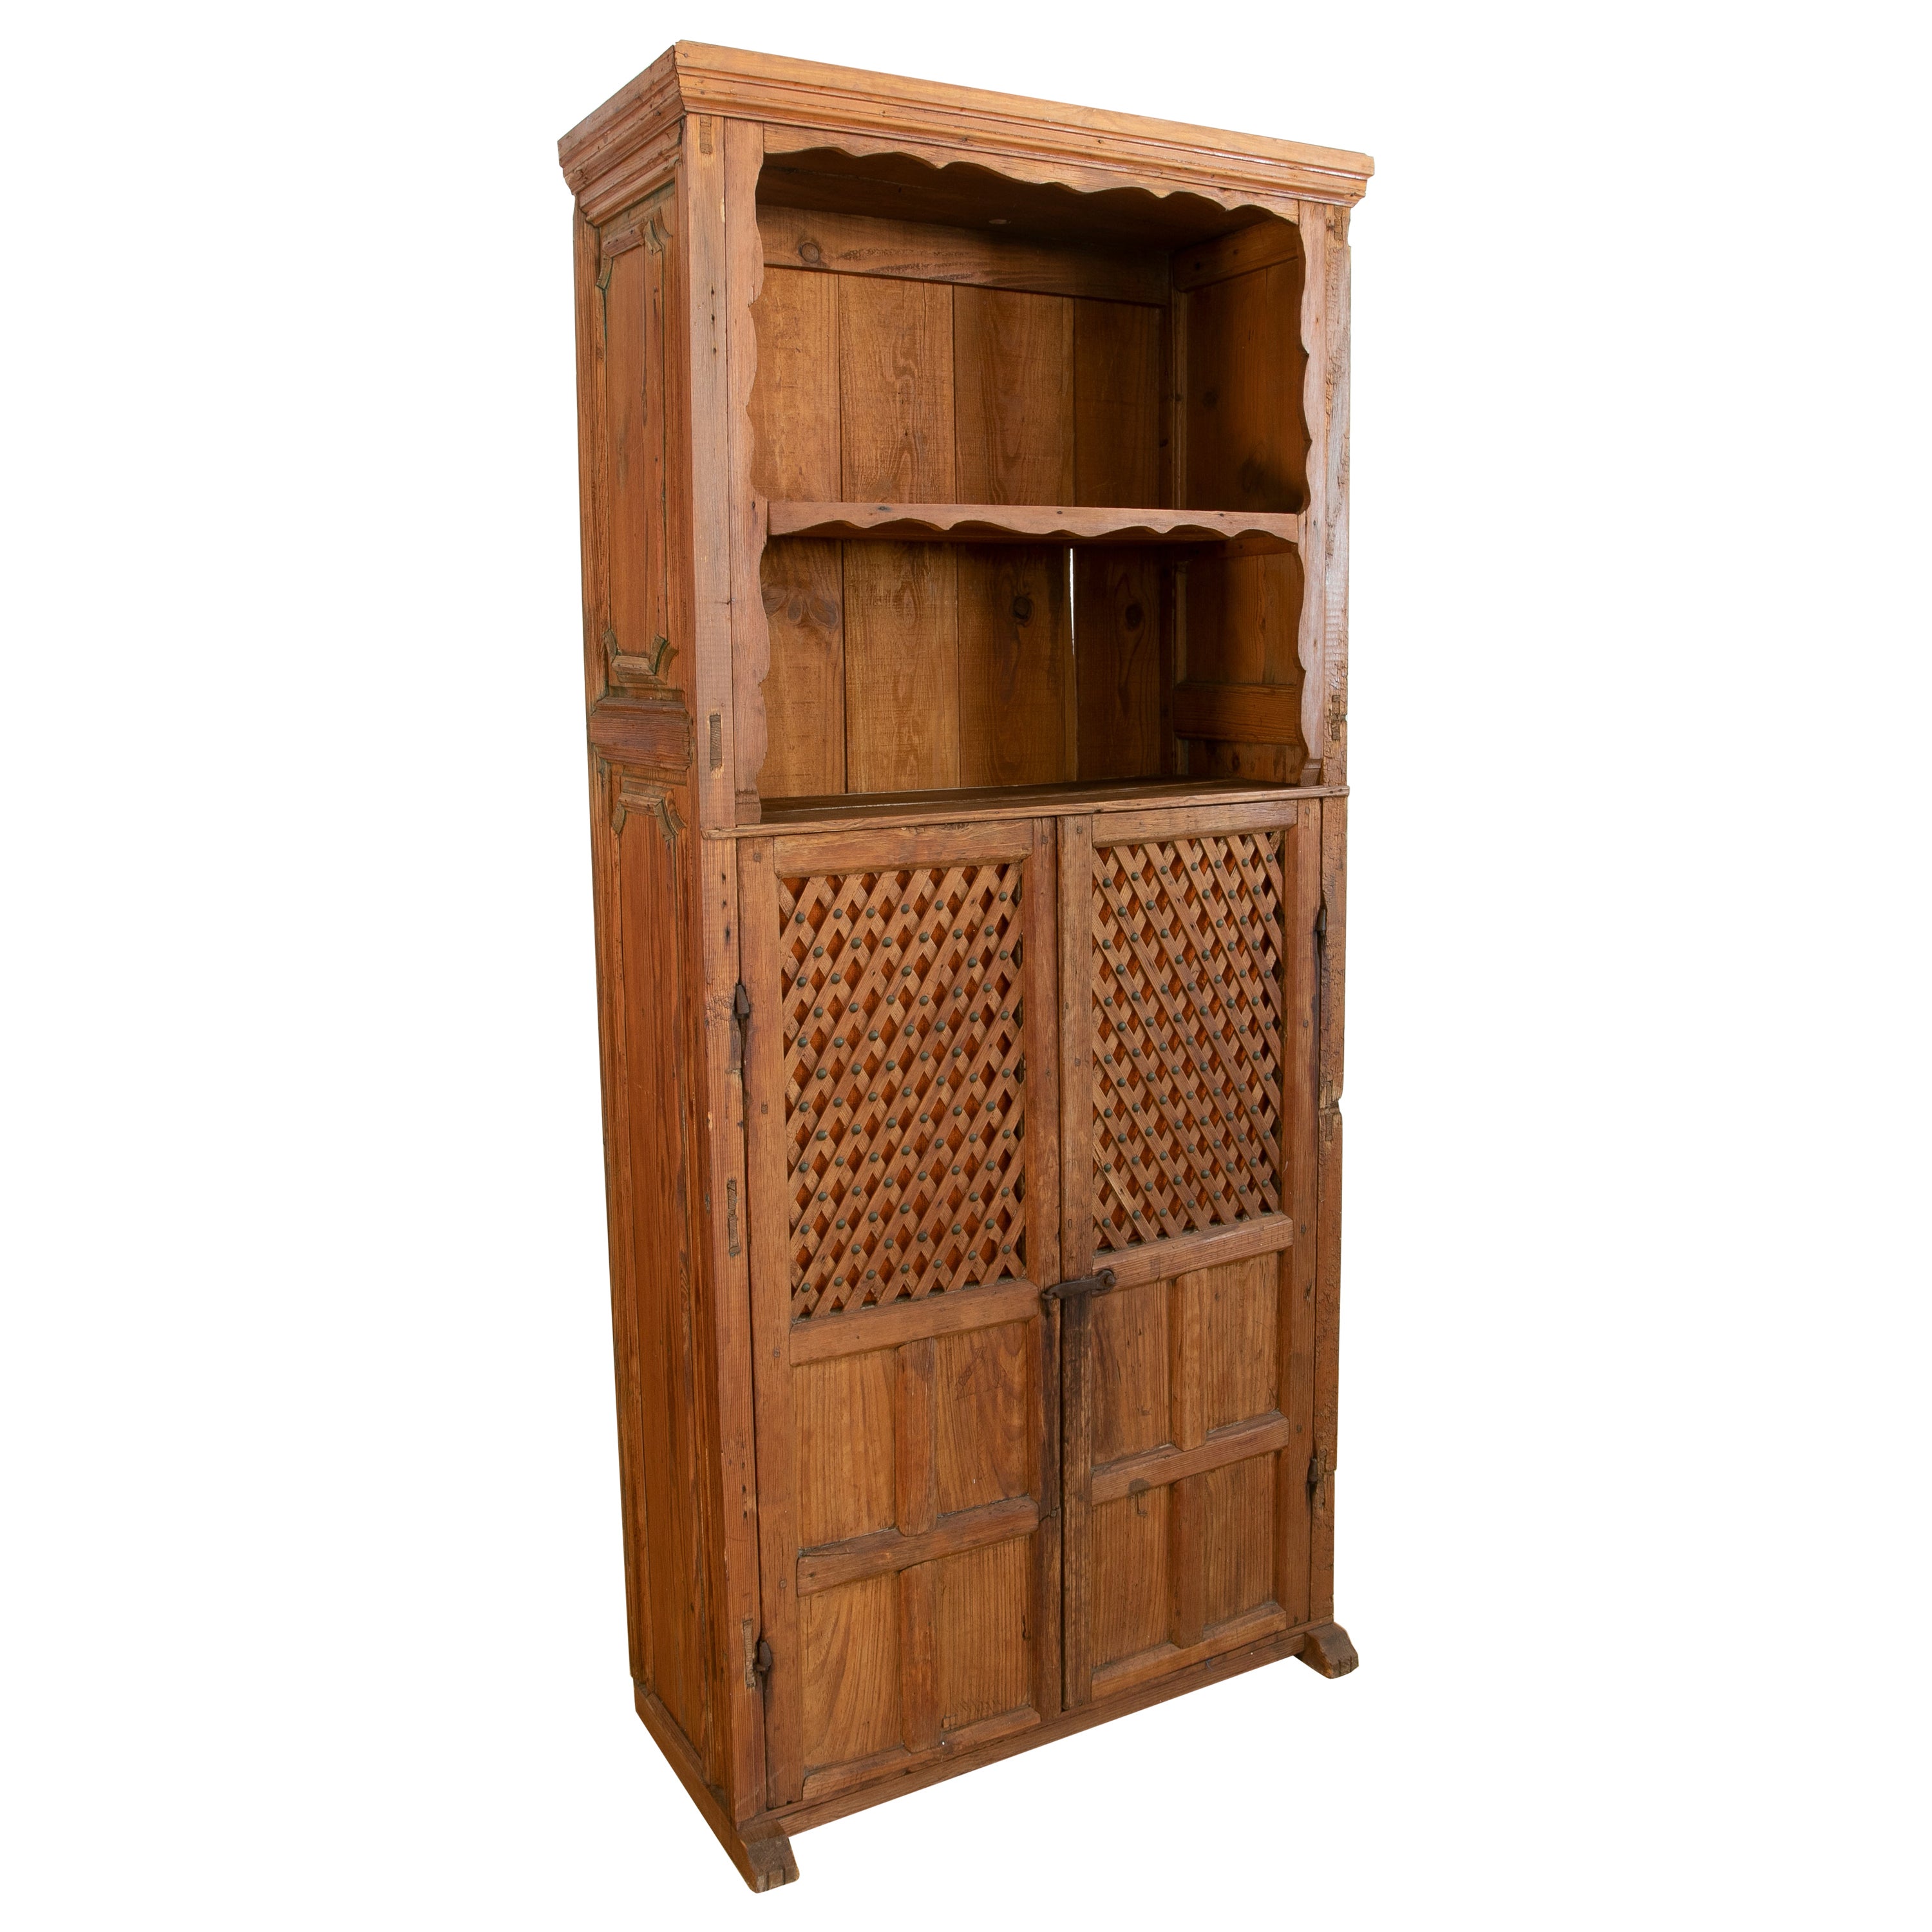 Spanish Wooden Cupboard with Shelves and Lattice Doors For Sale